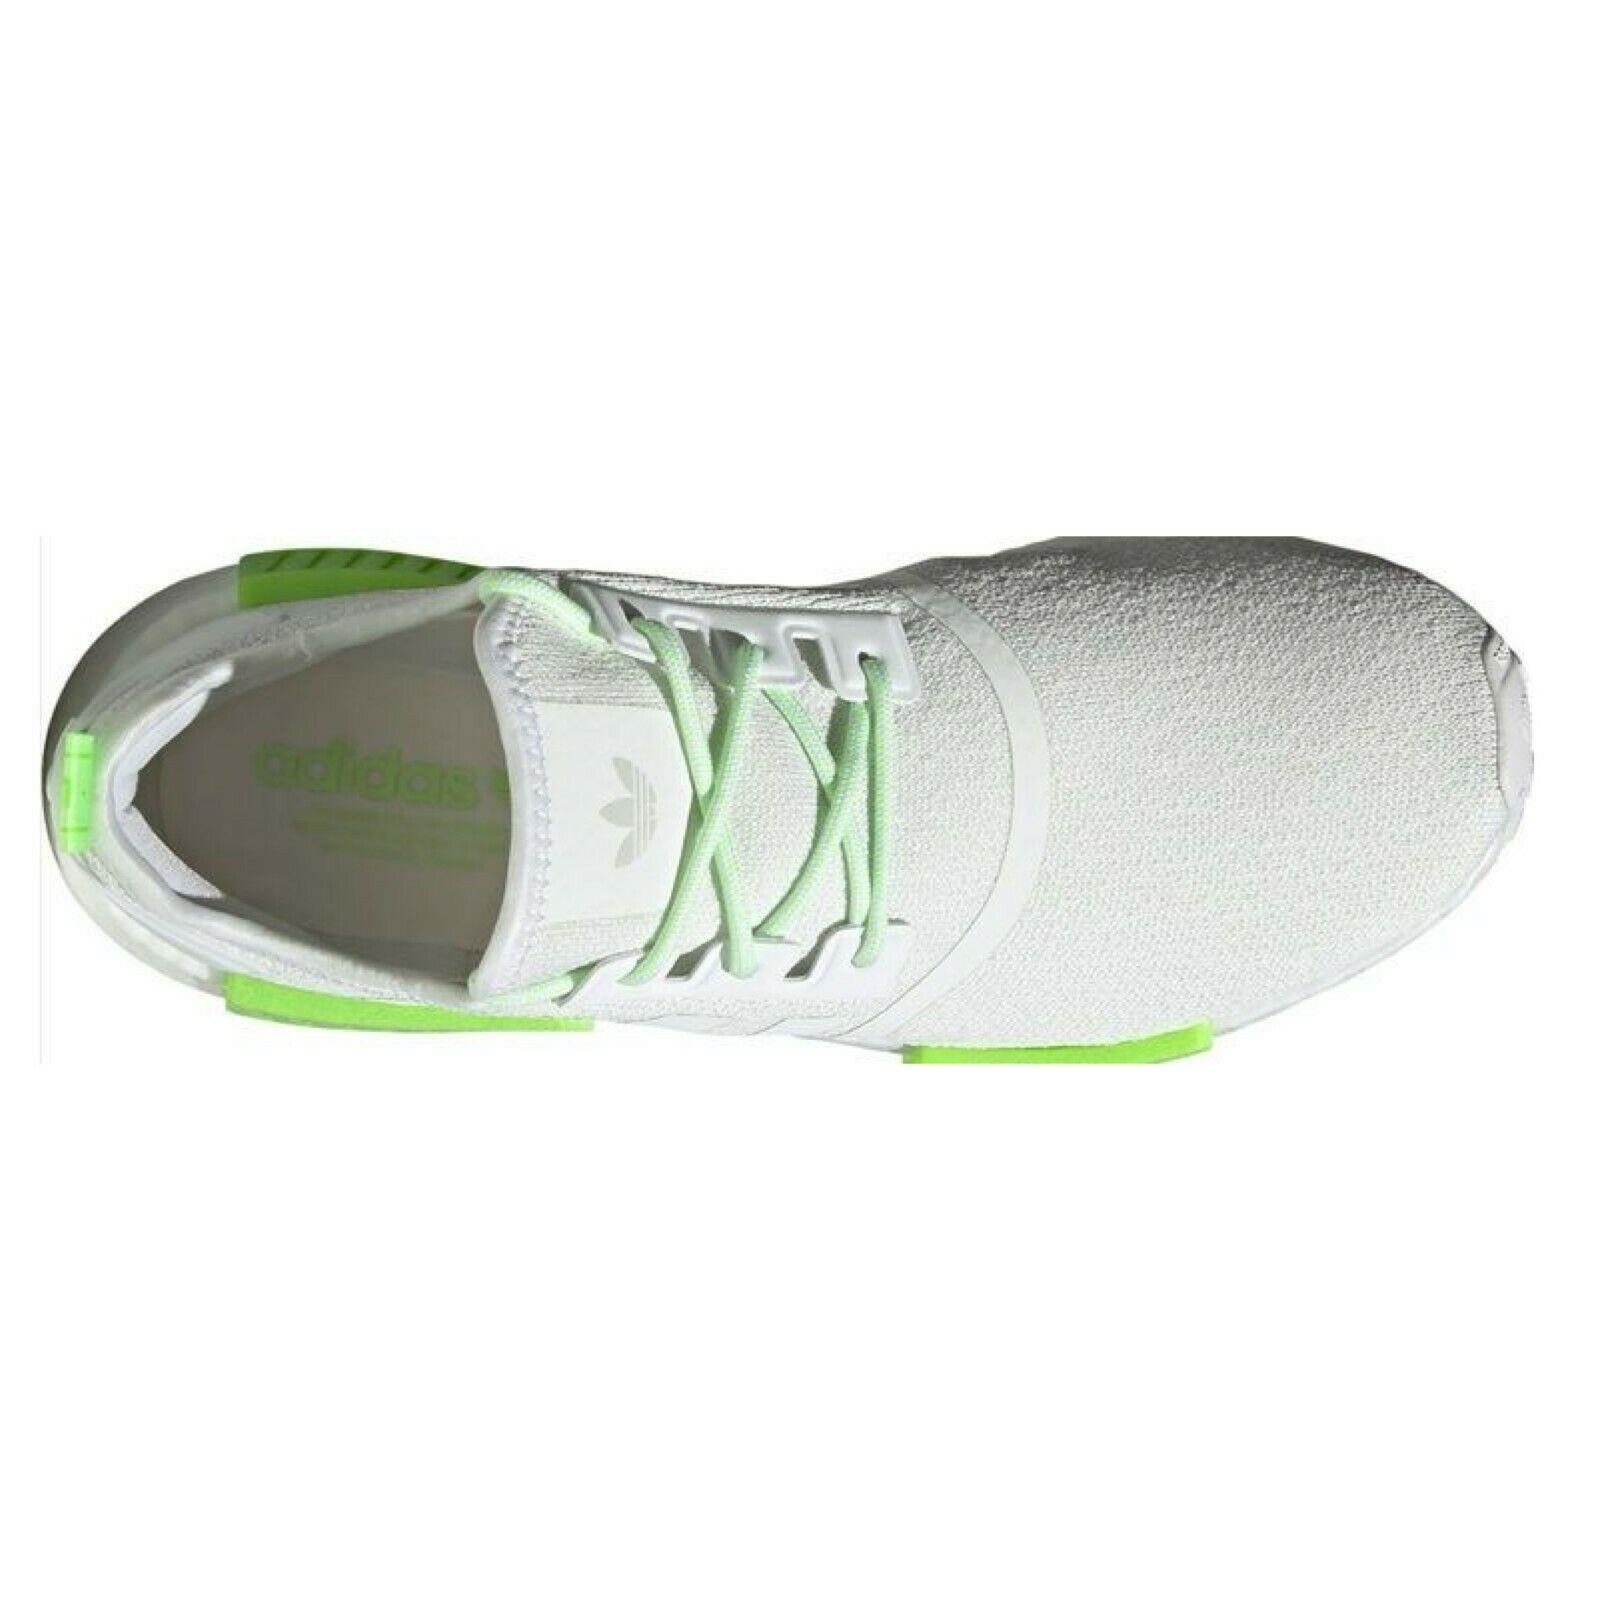 Adidas shoes NMD - Gray , GREY/NEON GREEN Manufacturer 6